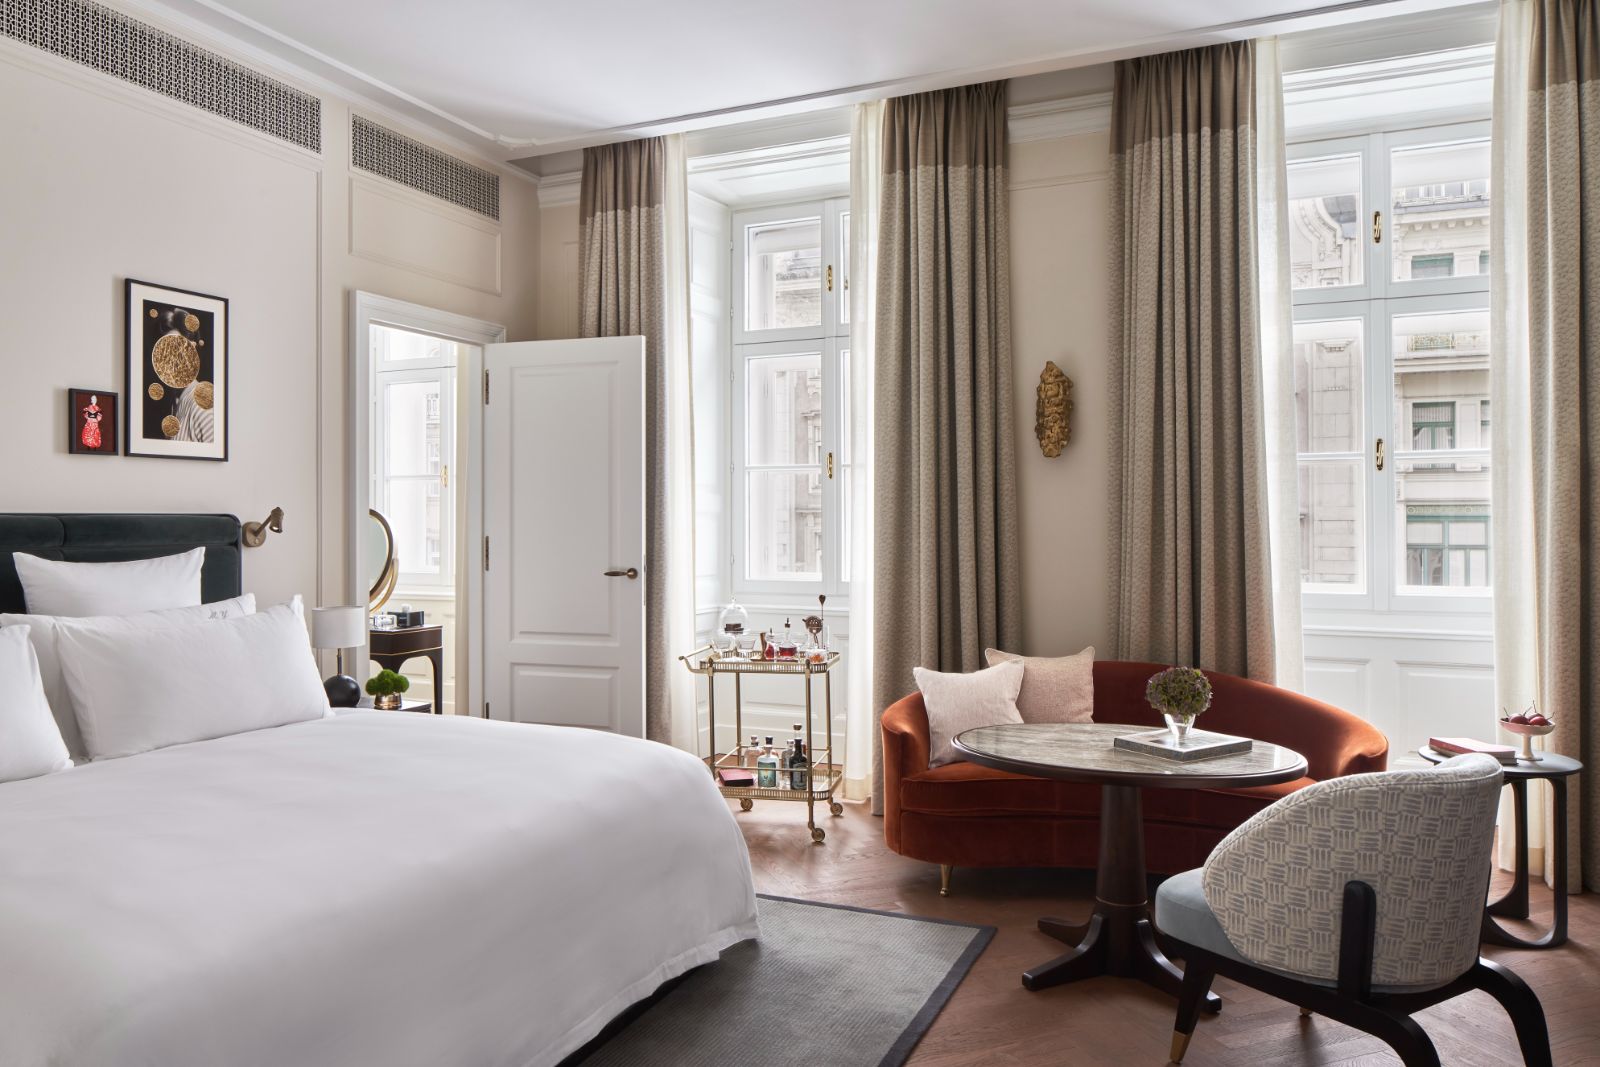 Guest suite bedroom at the Rosewood Vienna in Austria